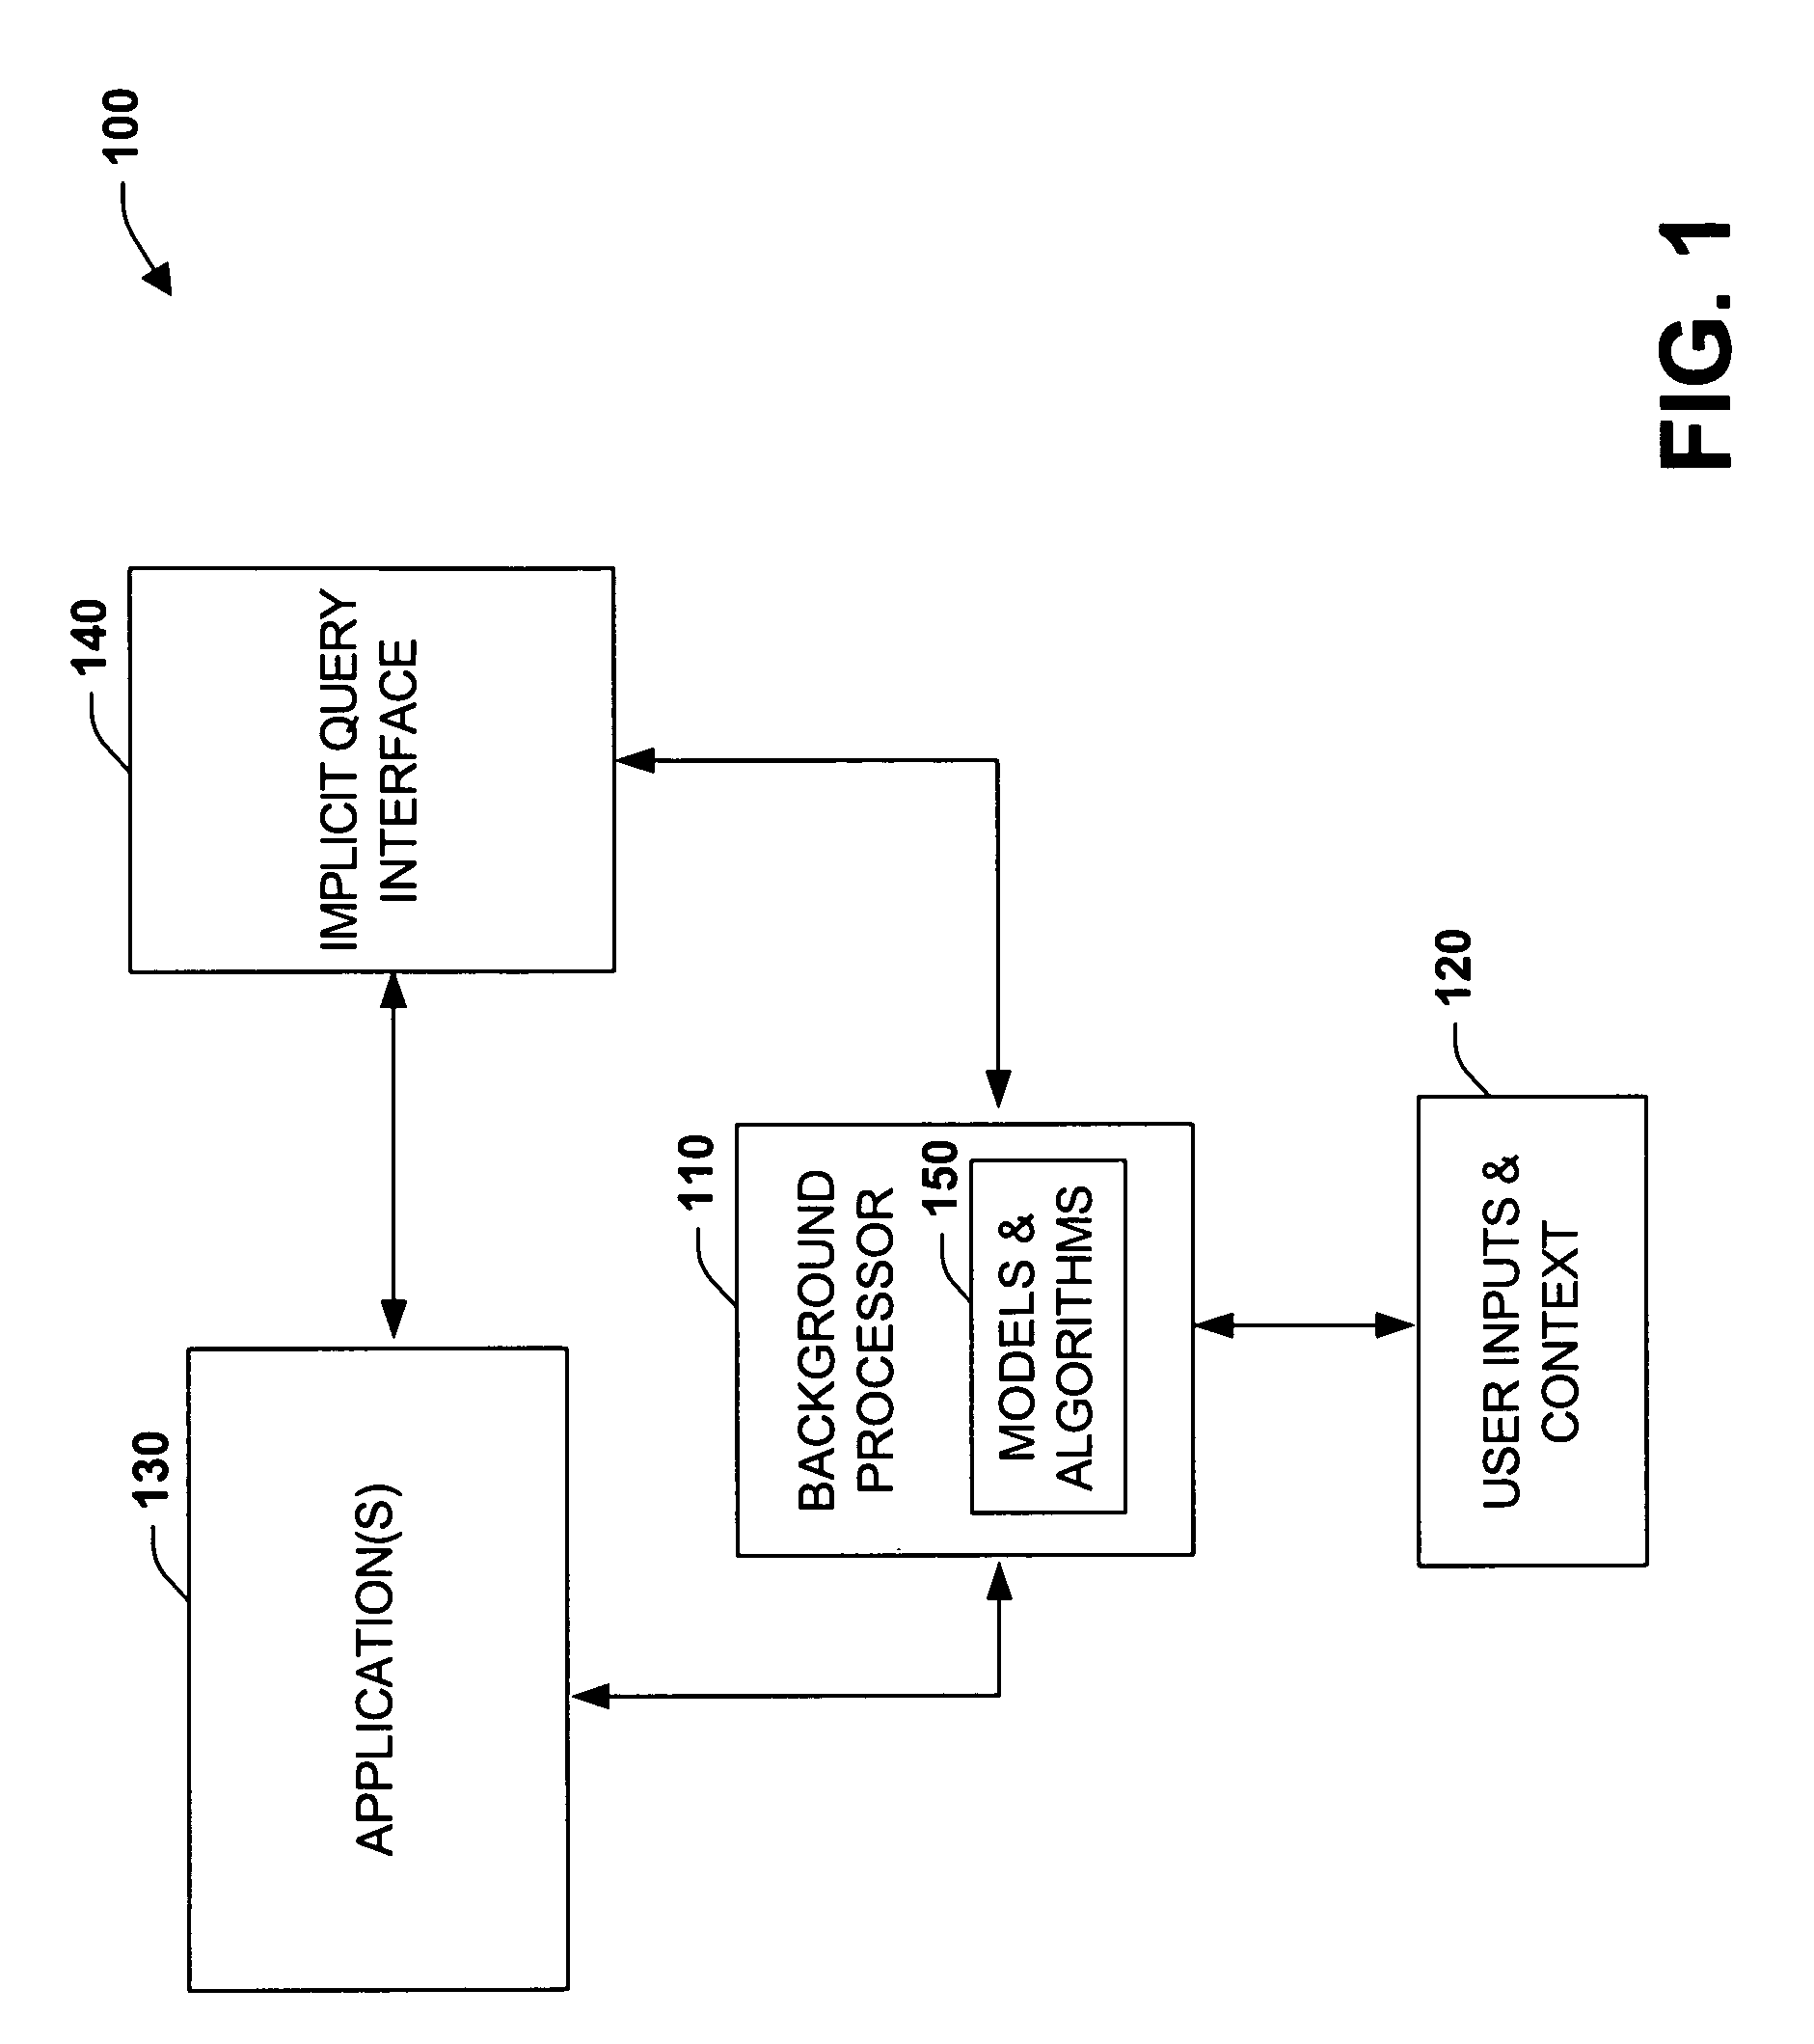 Systems and methods for performing background queries from content and activity